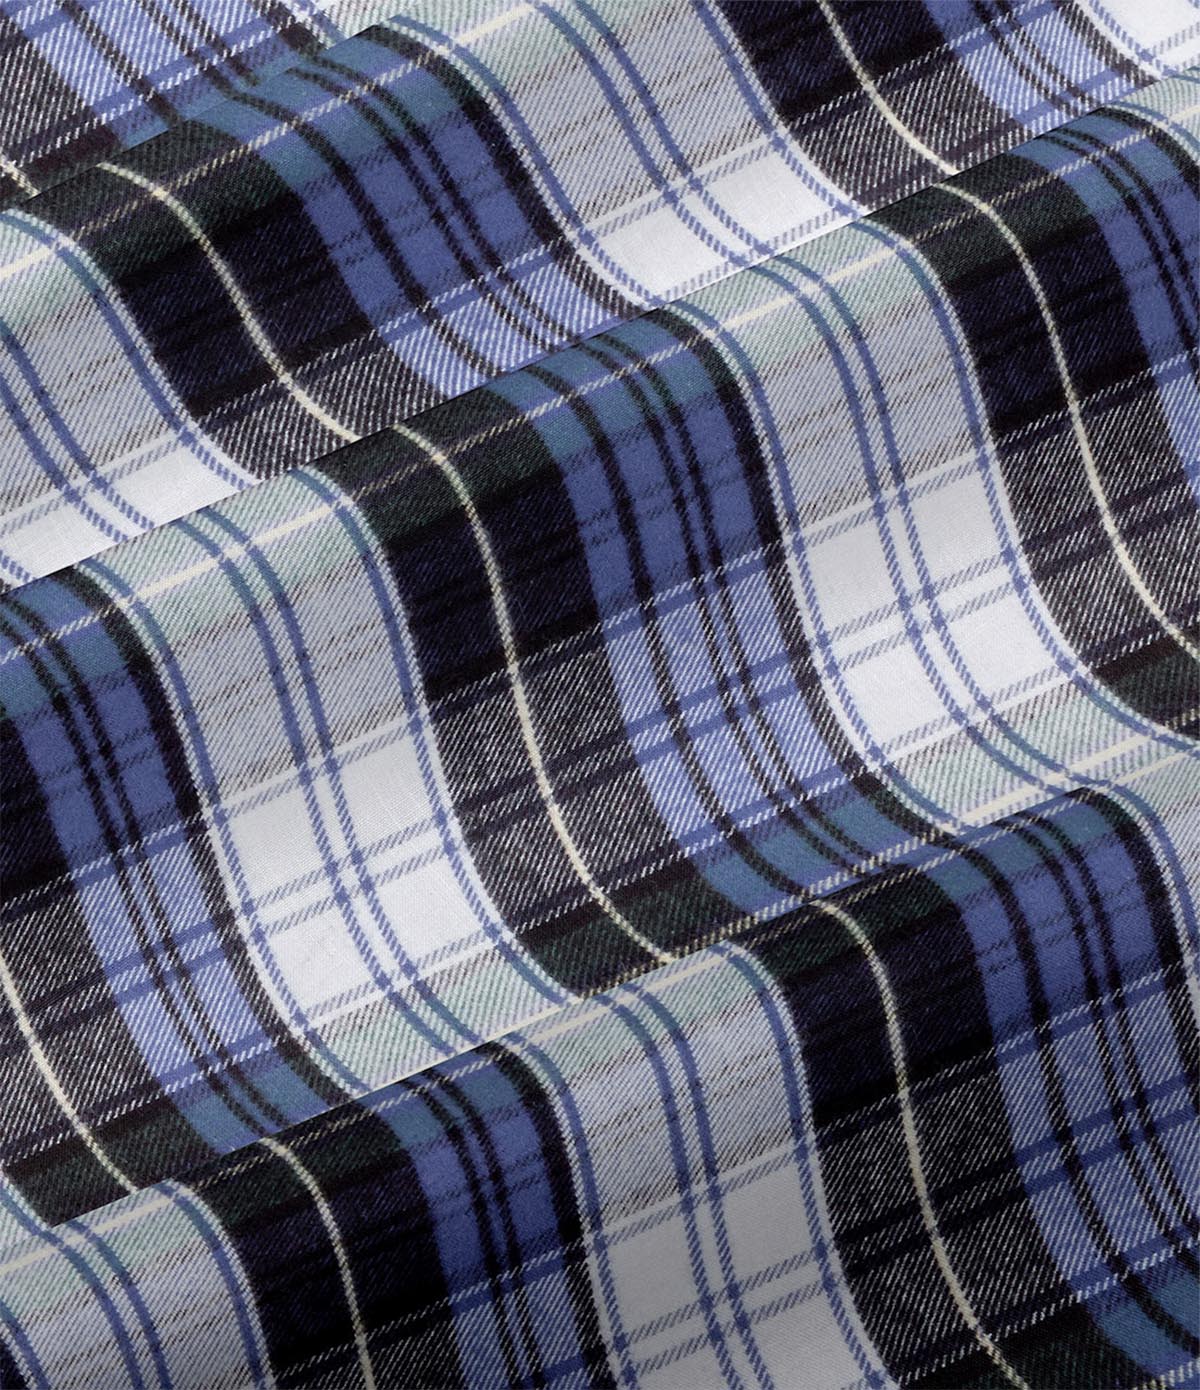 Organic Midweight Flannel Fabric By the Yard – The Vermont Flannel Company